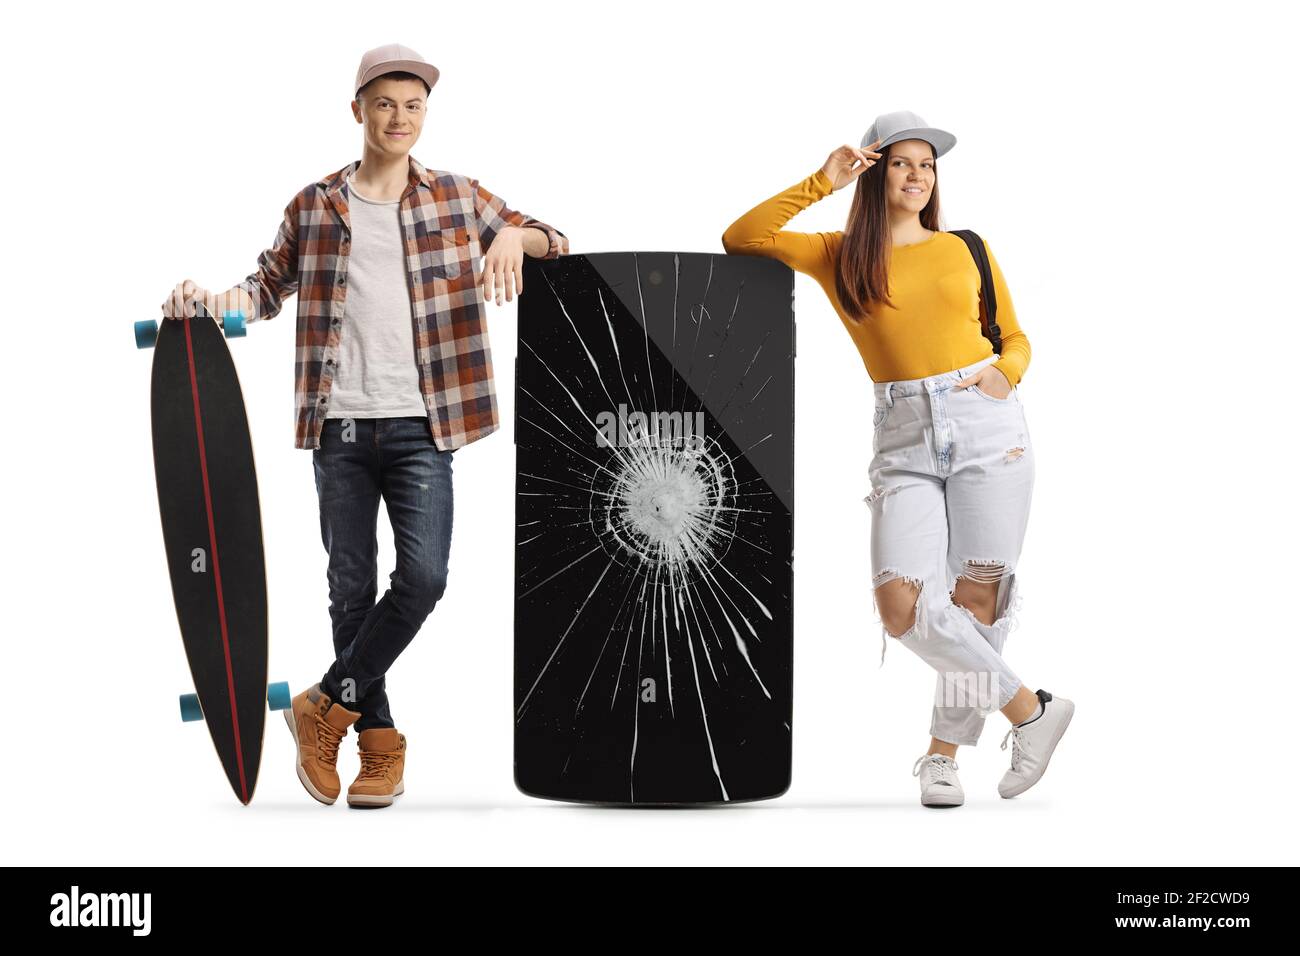 Teenagers leaning on a phone with a broken screen isolated on white background Stock Photo